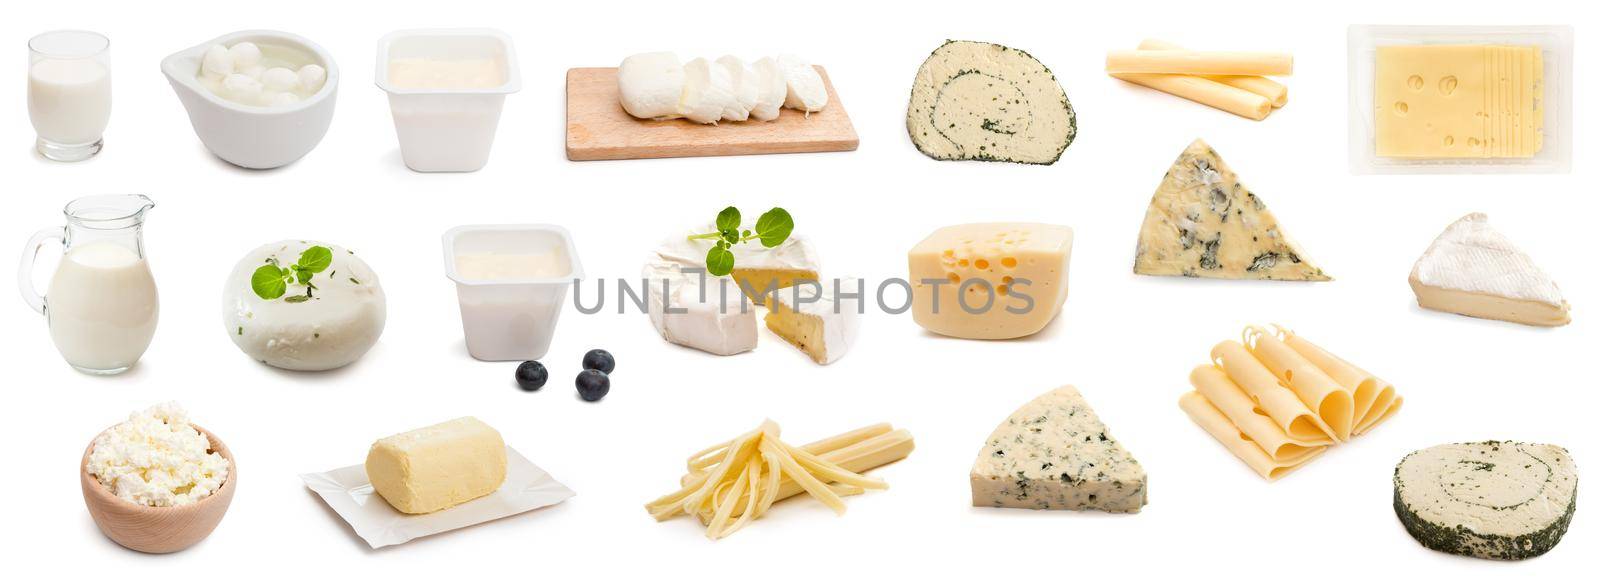 collage various types of cheeses on a white background